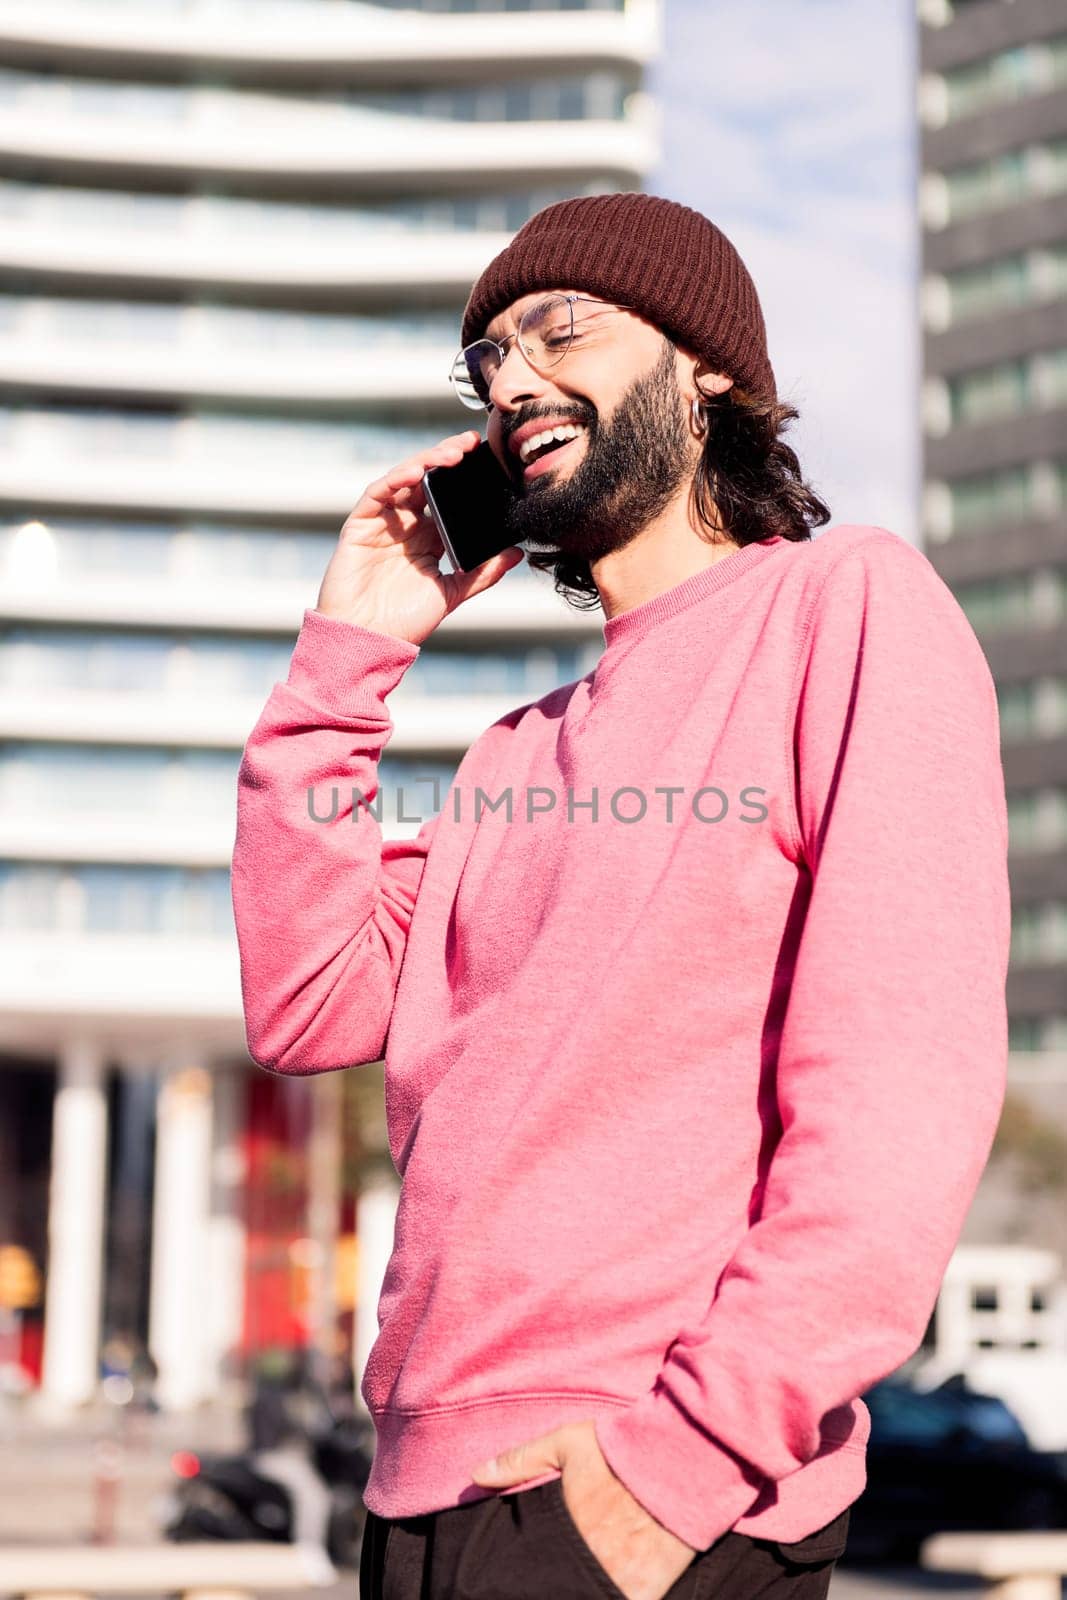 laughing young man on phone during sunny city walk, concept of urban lifestyle and technology of communication